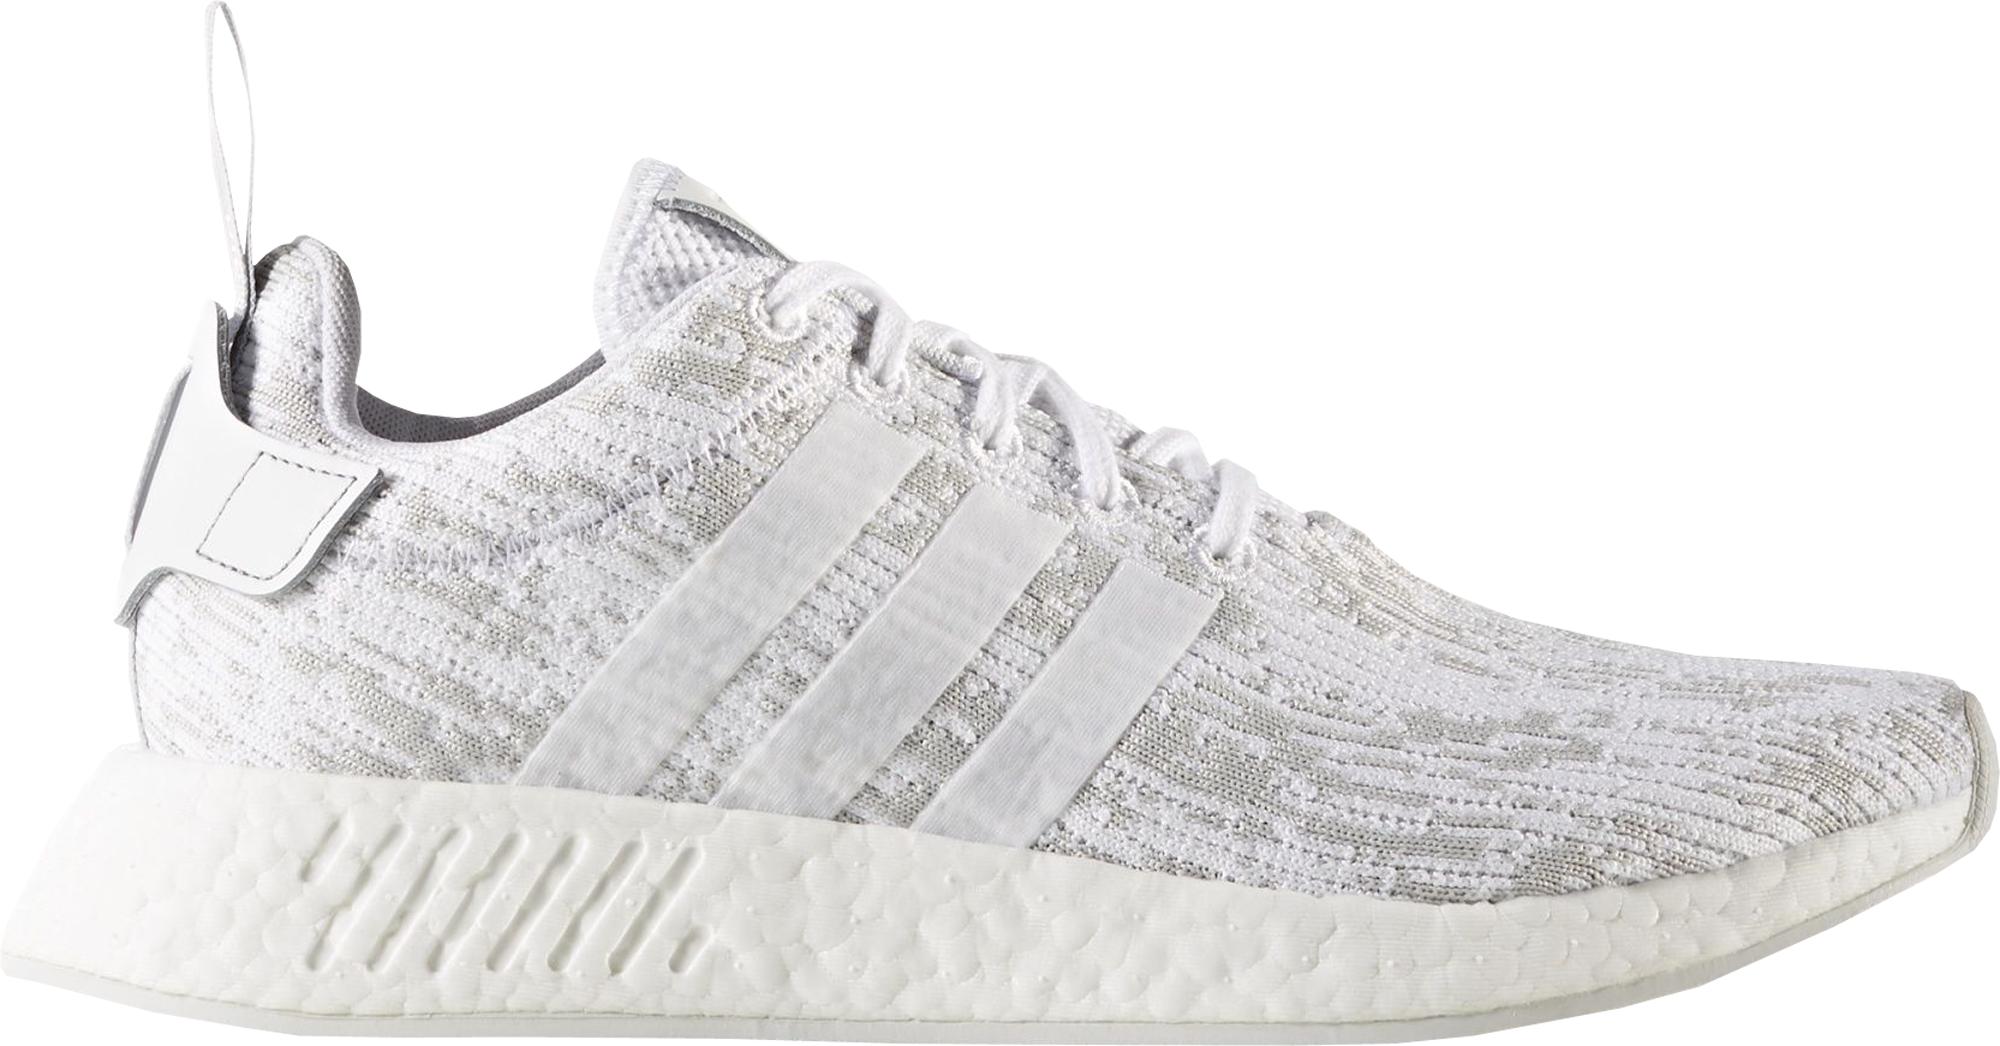 New adidas NMD R2 Colorways Releasing in July